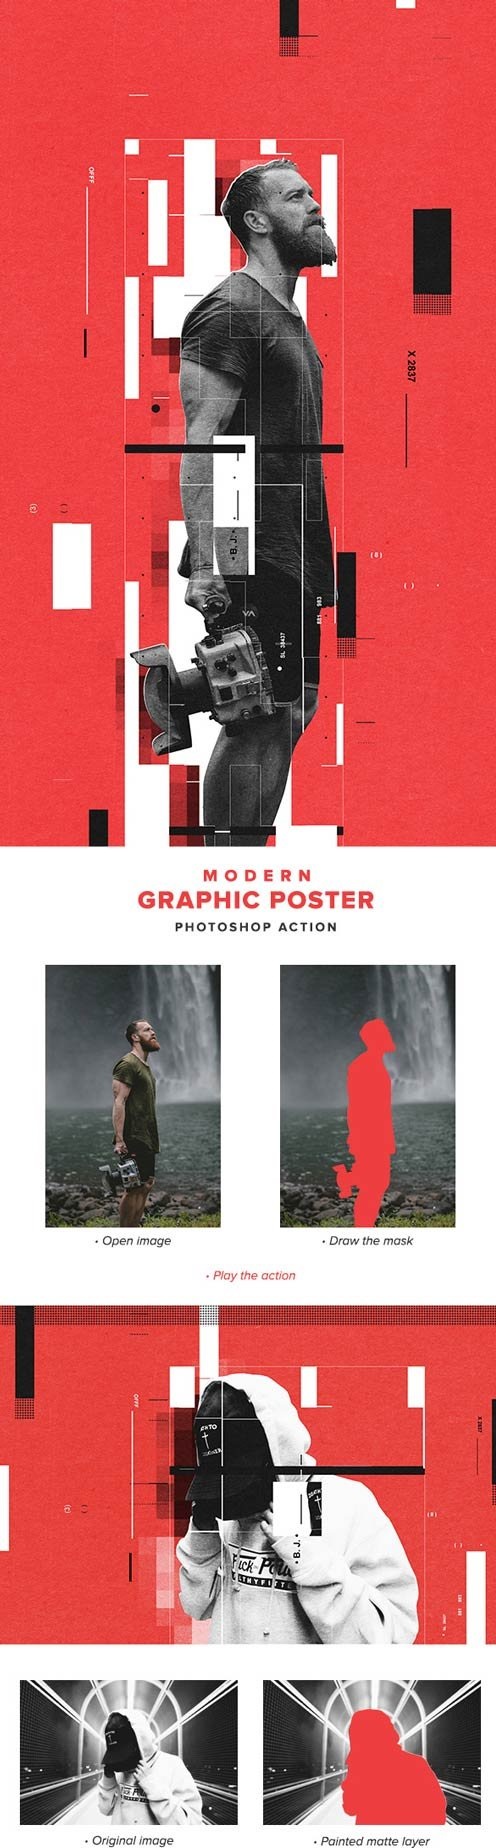 Modern Graphic Poster Action - 20080917